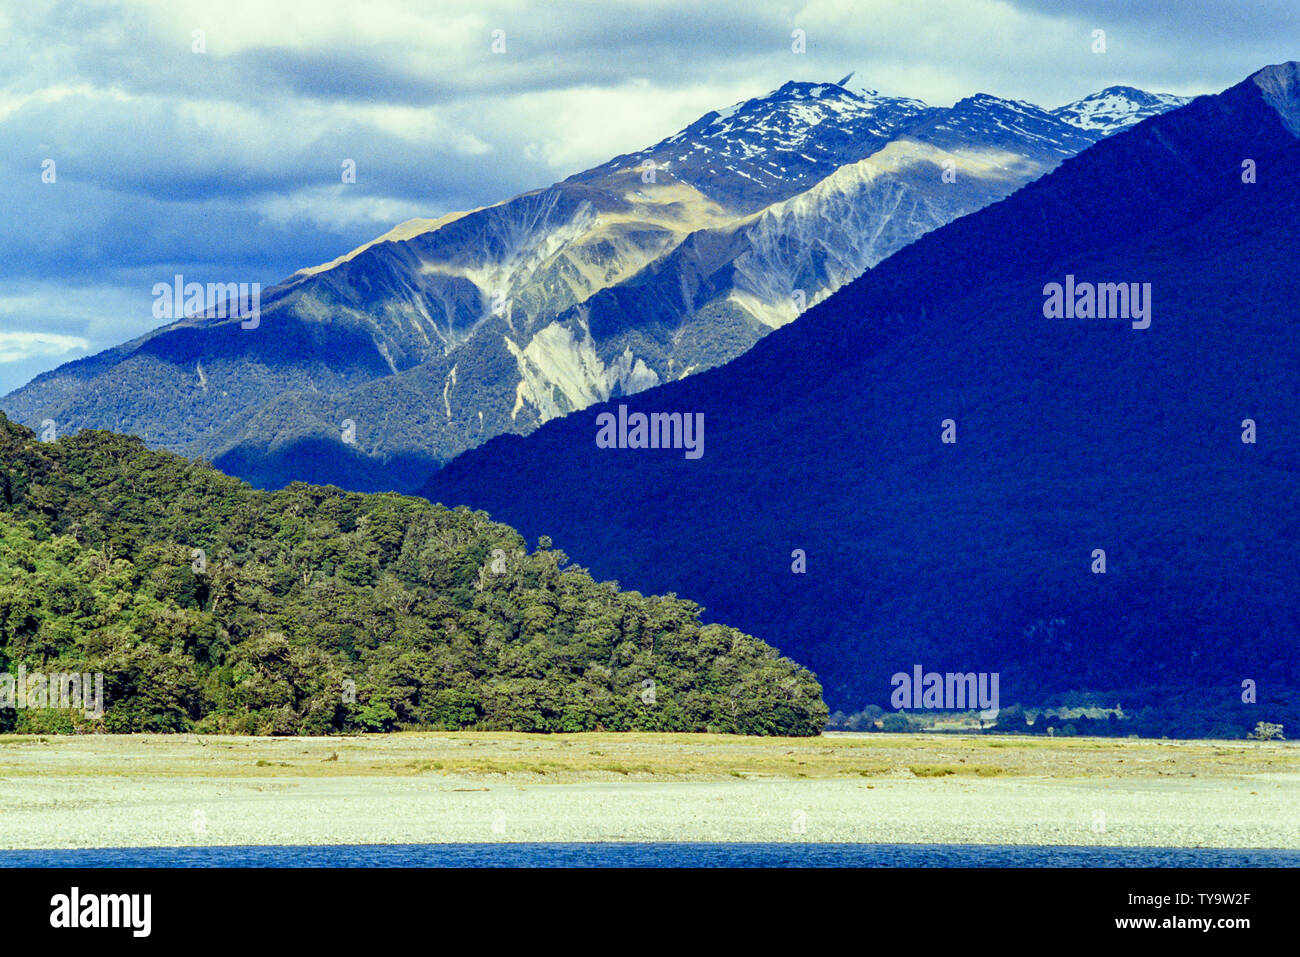 New Zealand, South Island. Near Queenstown, a majestic and barren landscape. Photo: © Simon Grosset. Archive: Image digitised from an original transpa Stock Photo